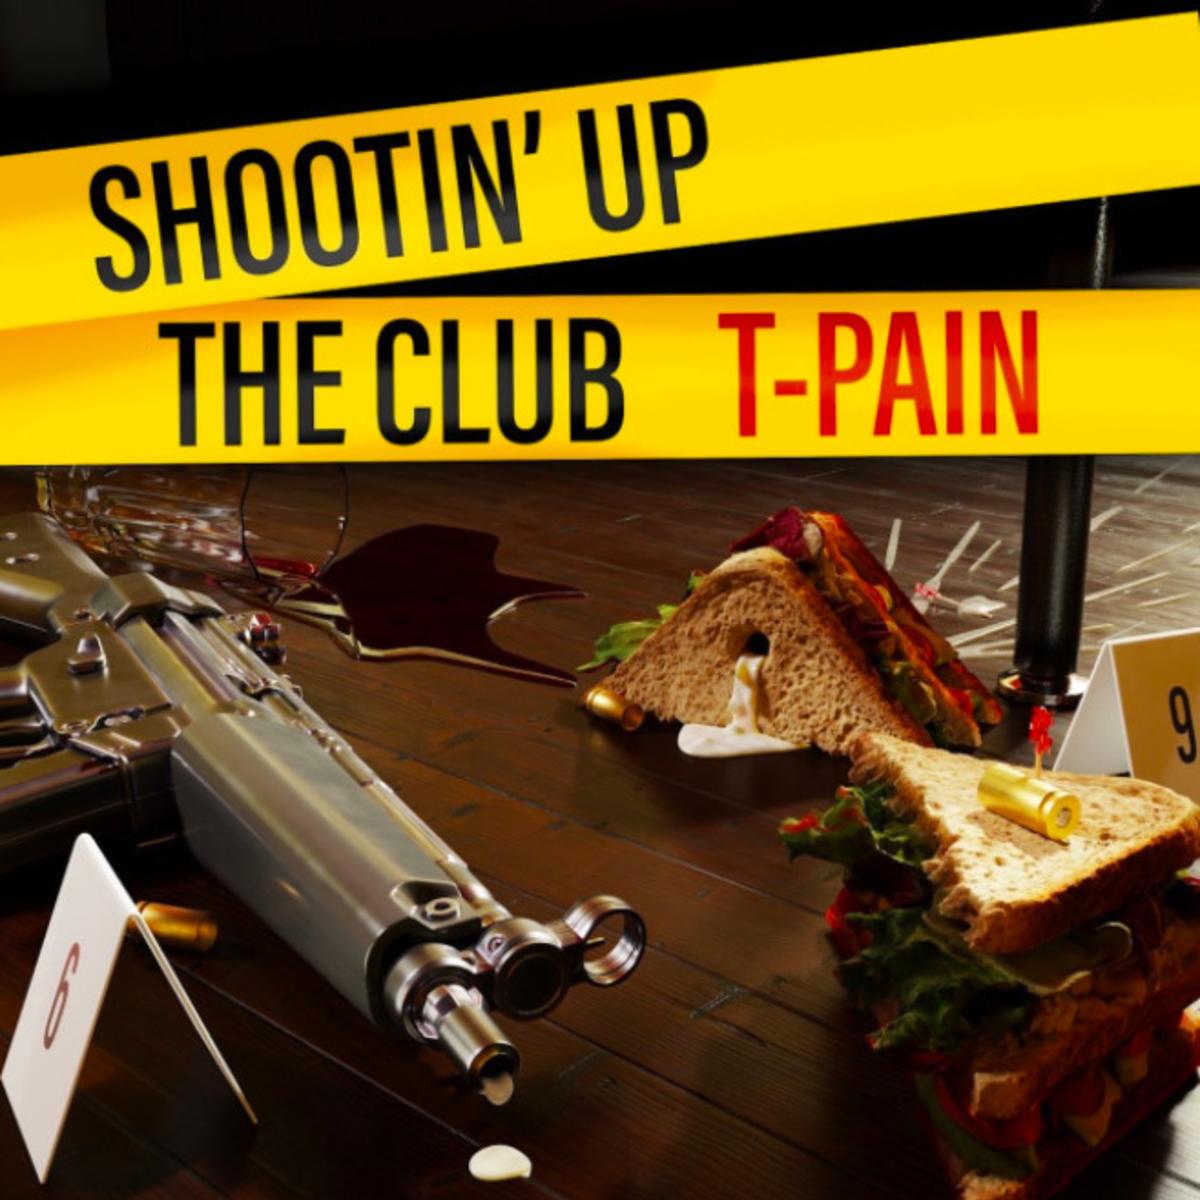 DOWNLOAD MP3: T-Pain - Shootin Up The Club